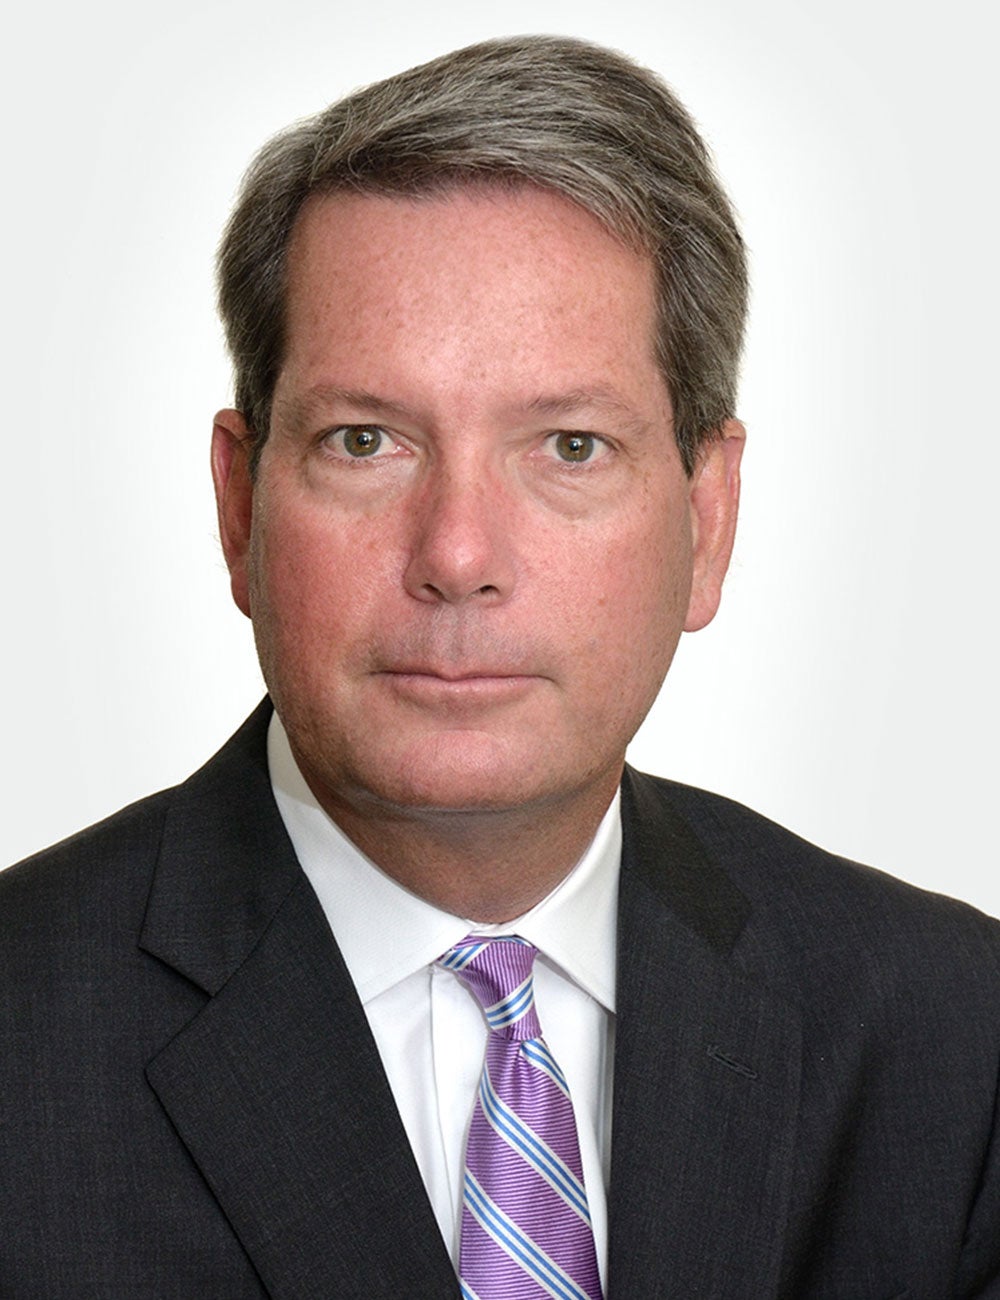 William Creevy, MD, MS